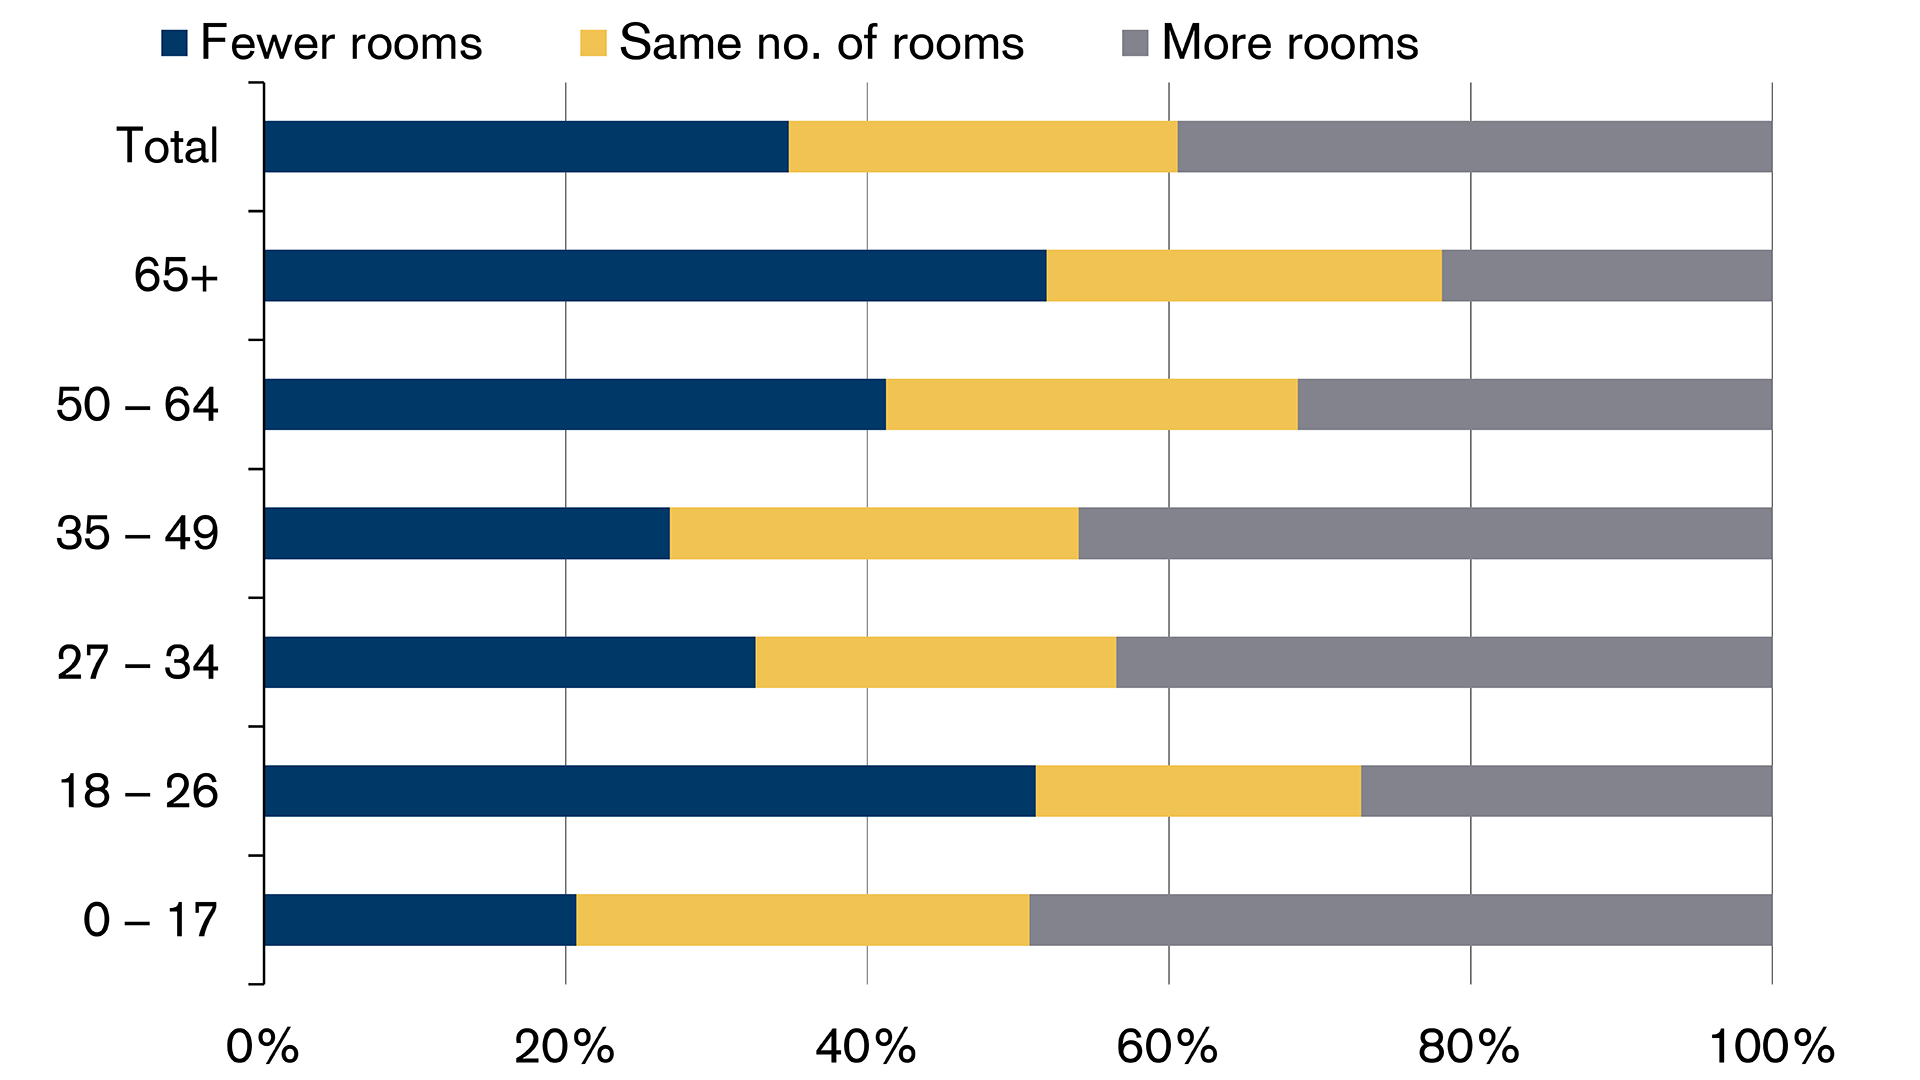 Age and living situation influence the number of rooms in a property. 